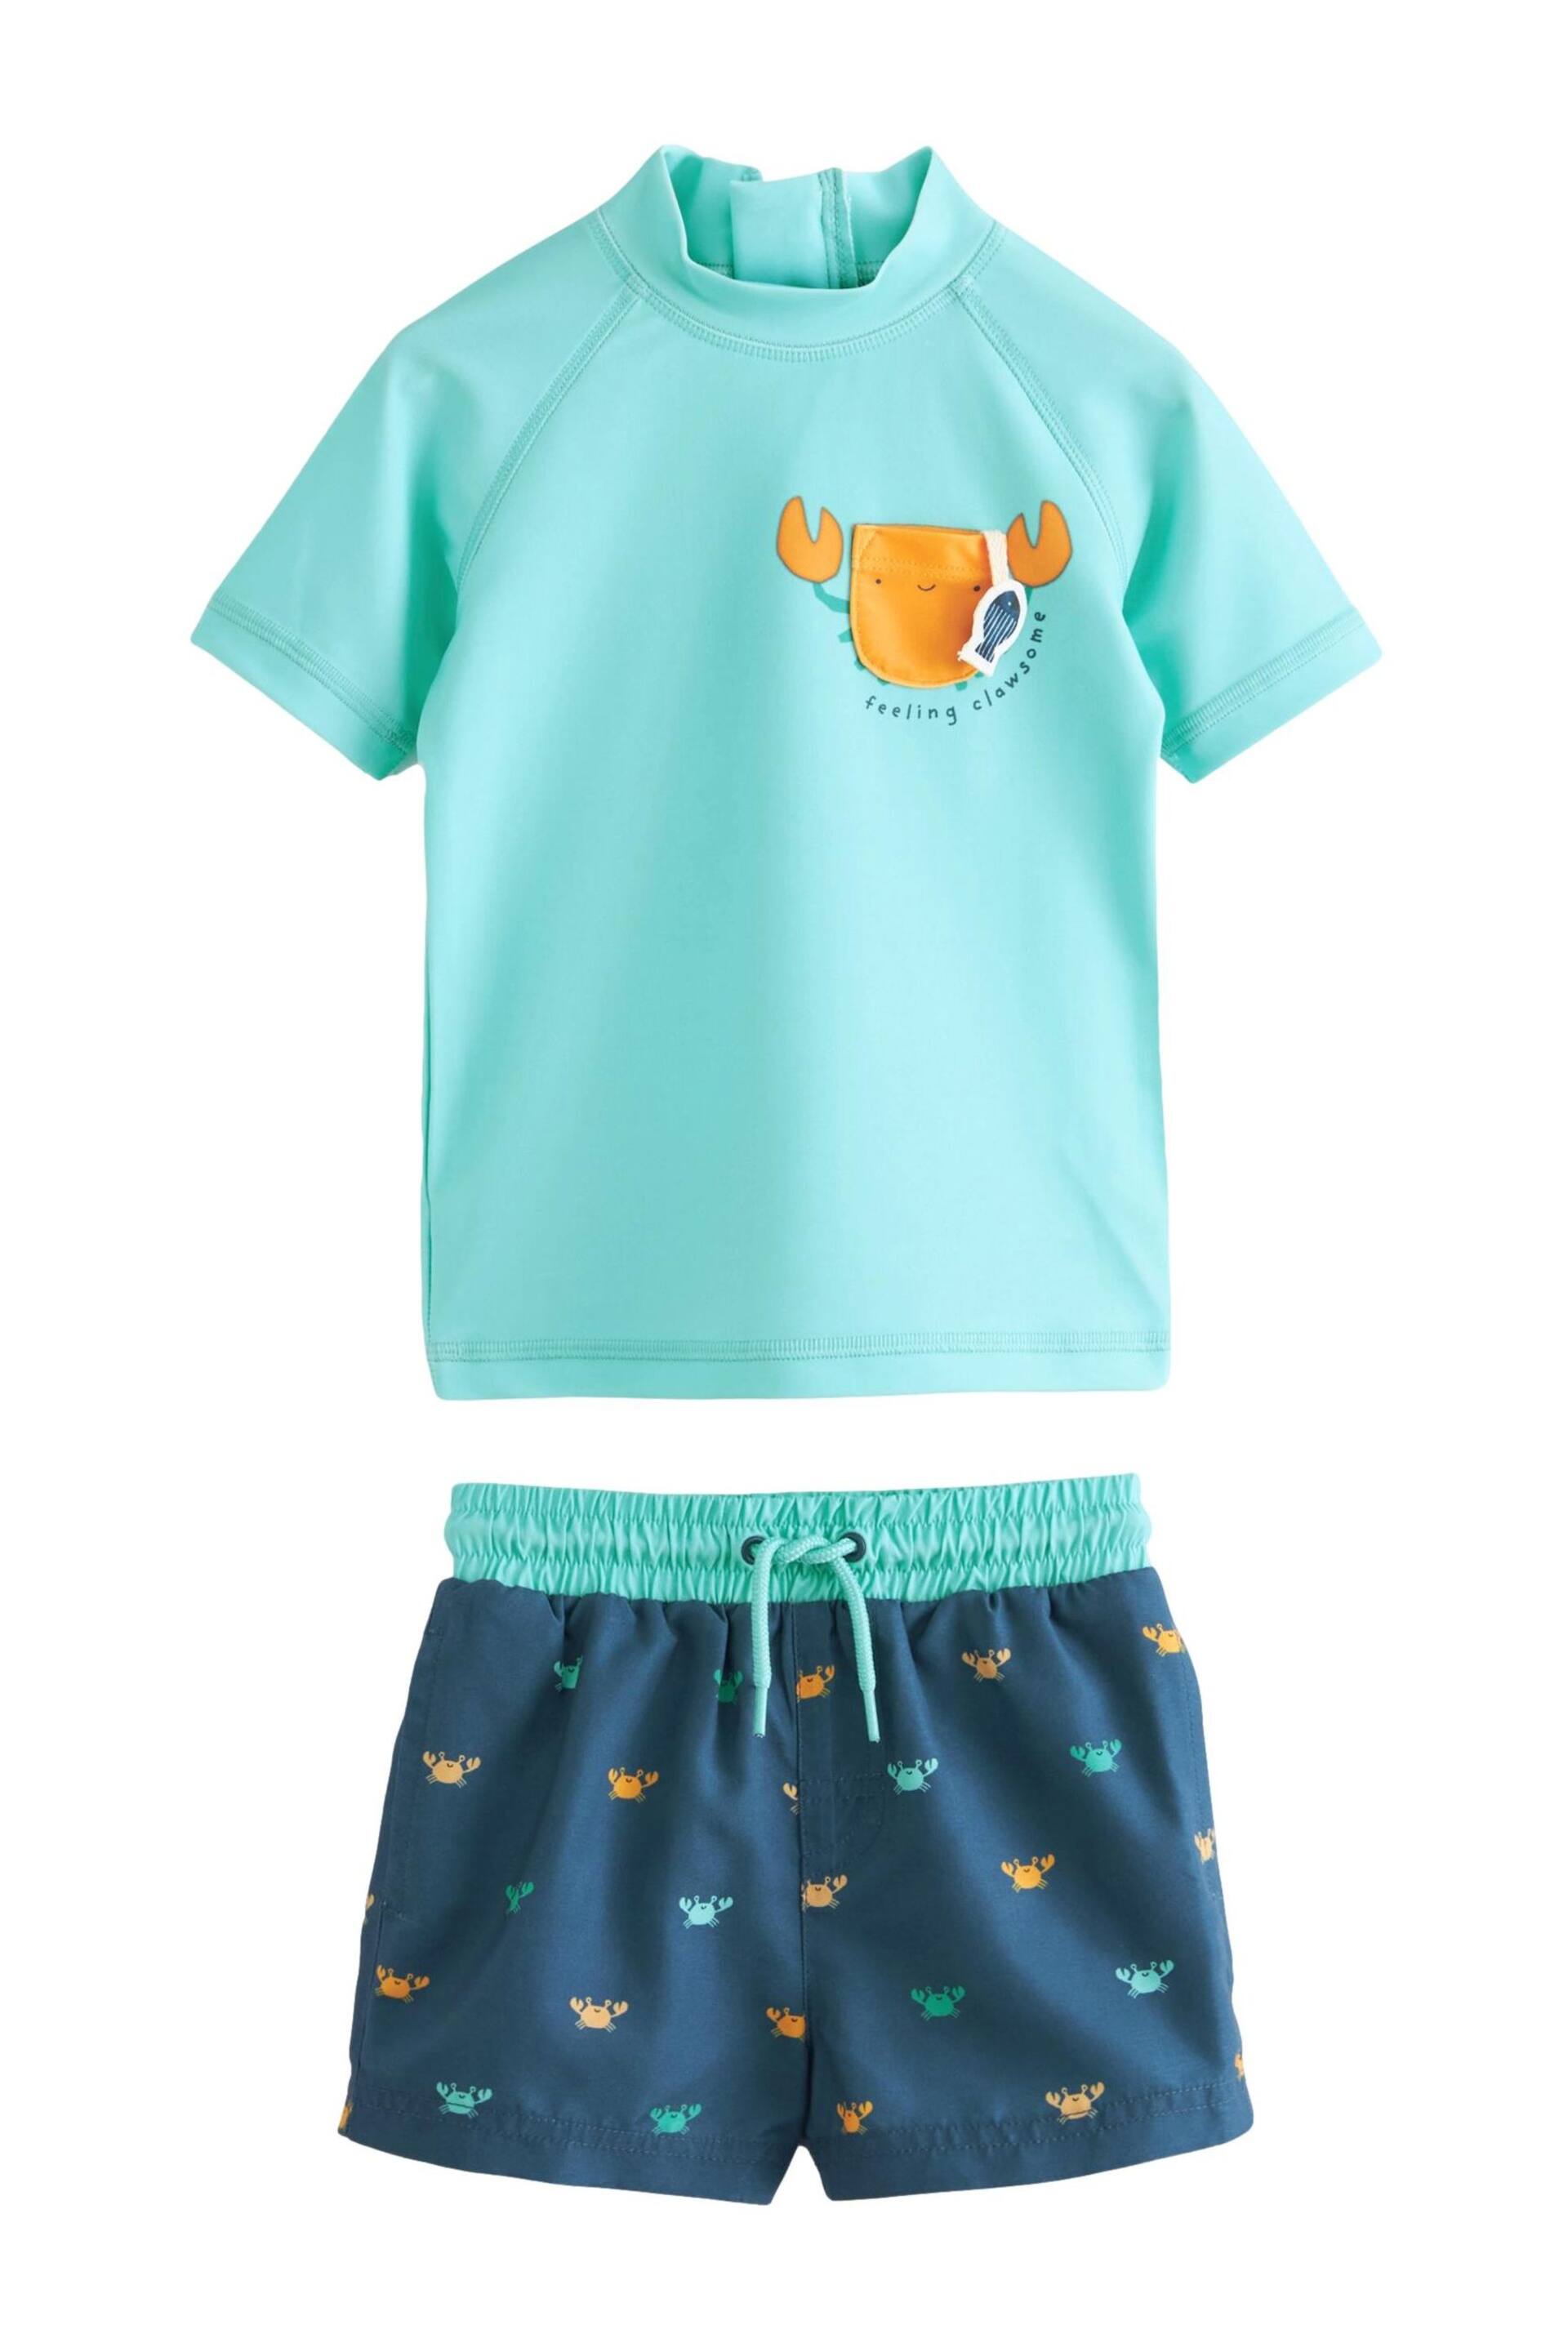 Blue Crab Sunsafe Top and Shorts Set (3mths-7yrs) - Image 7 of 9